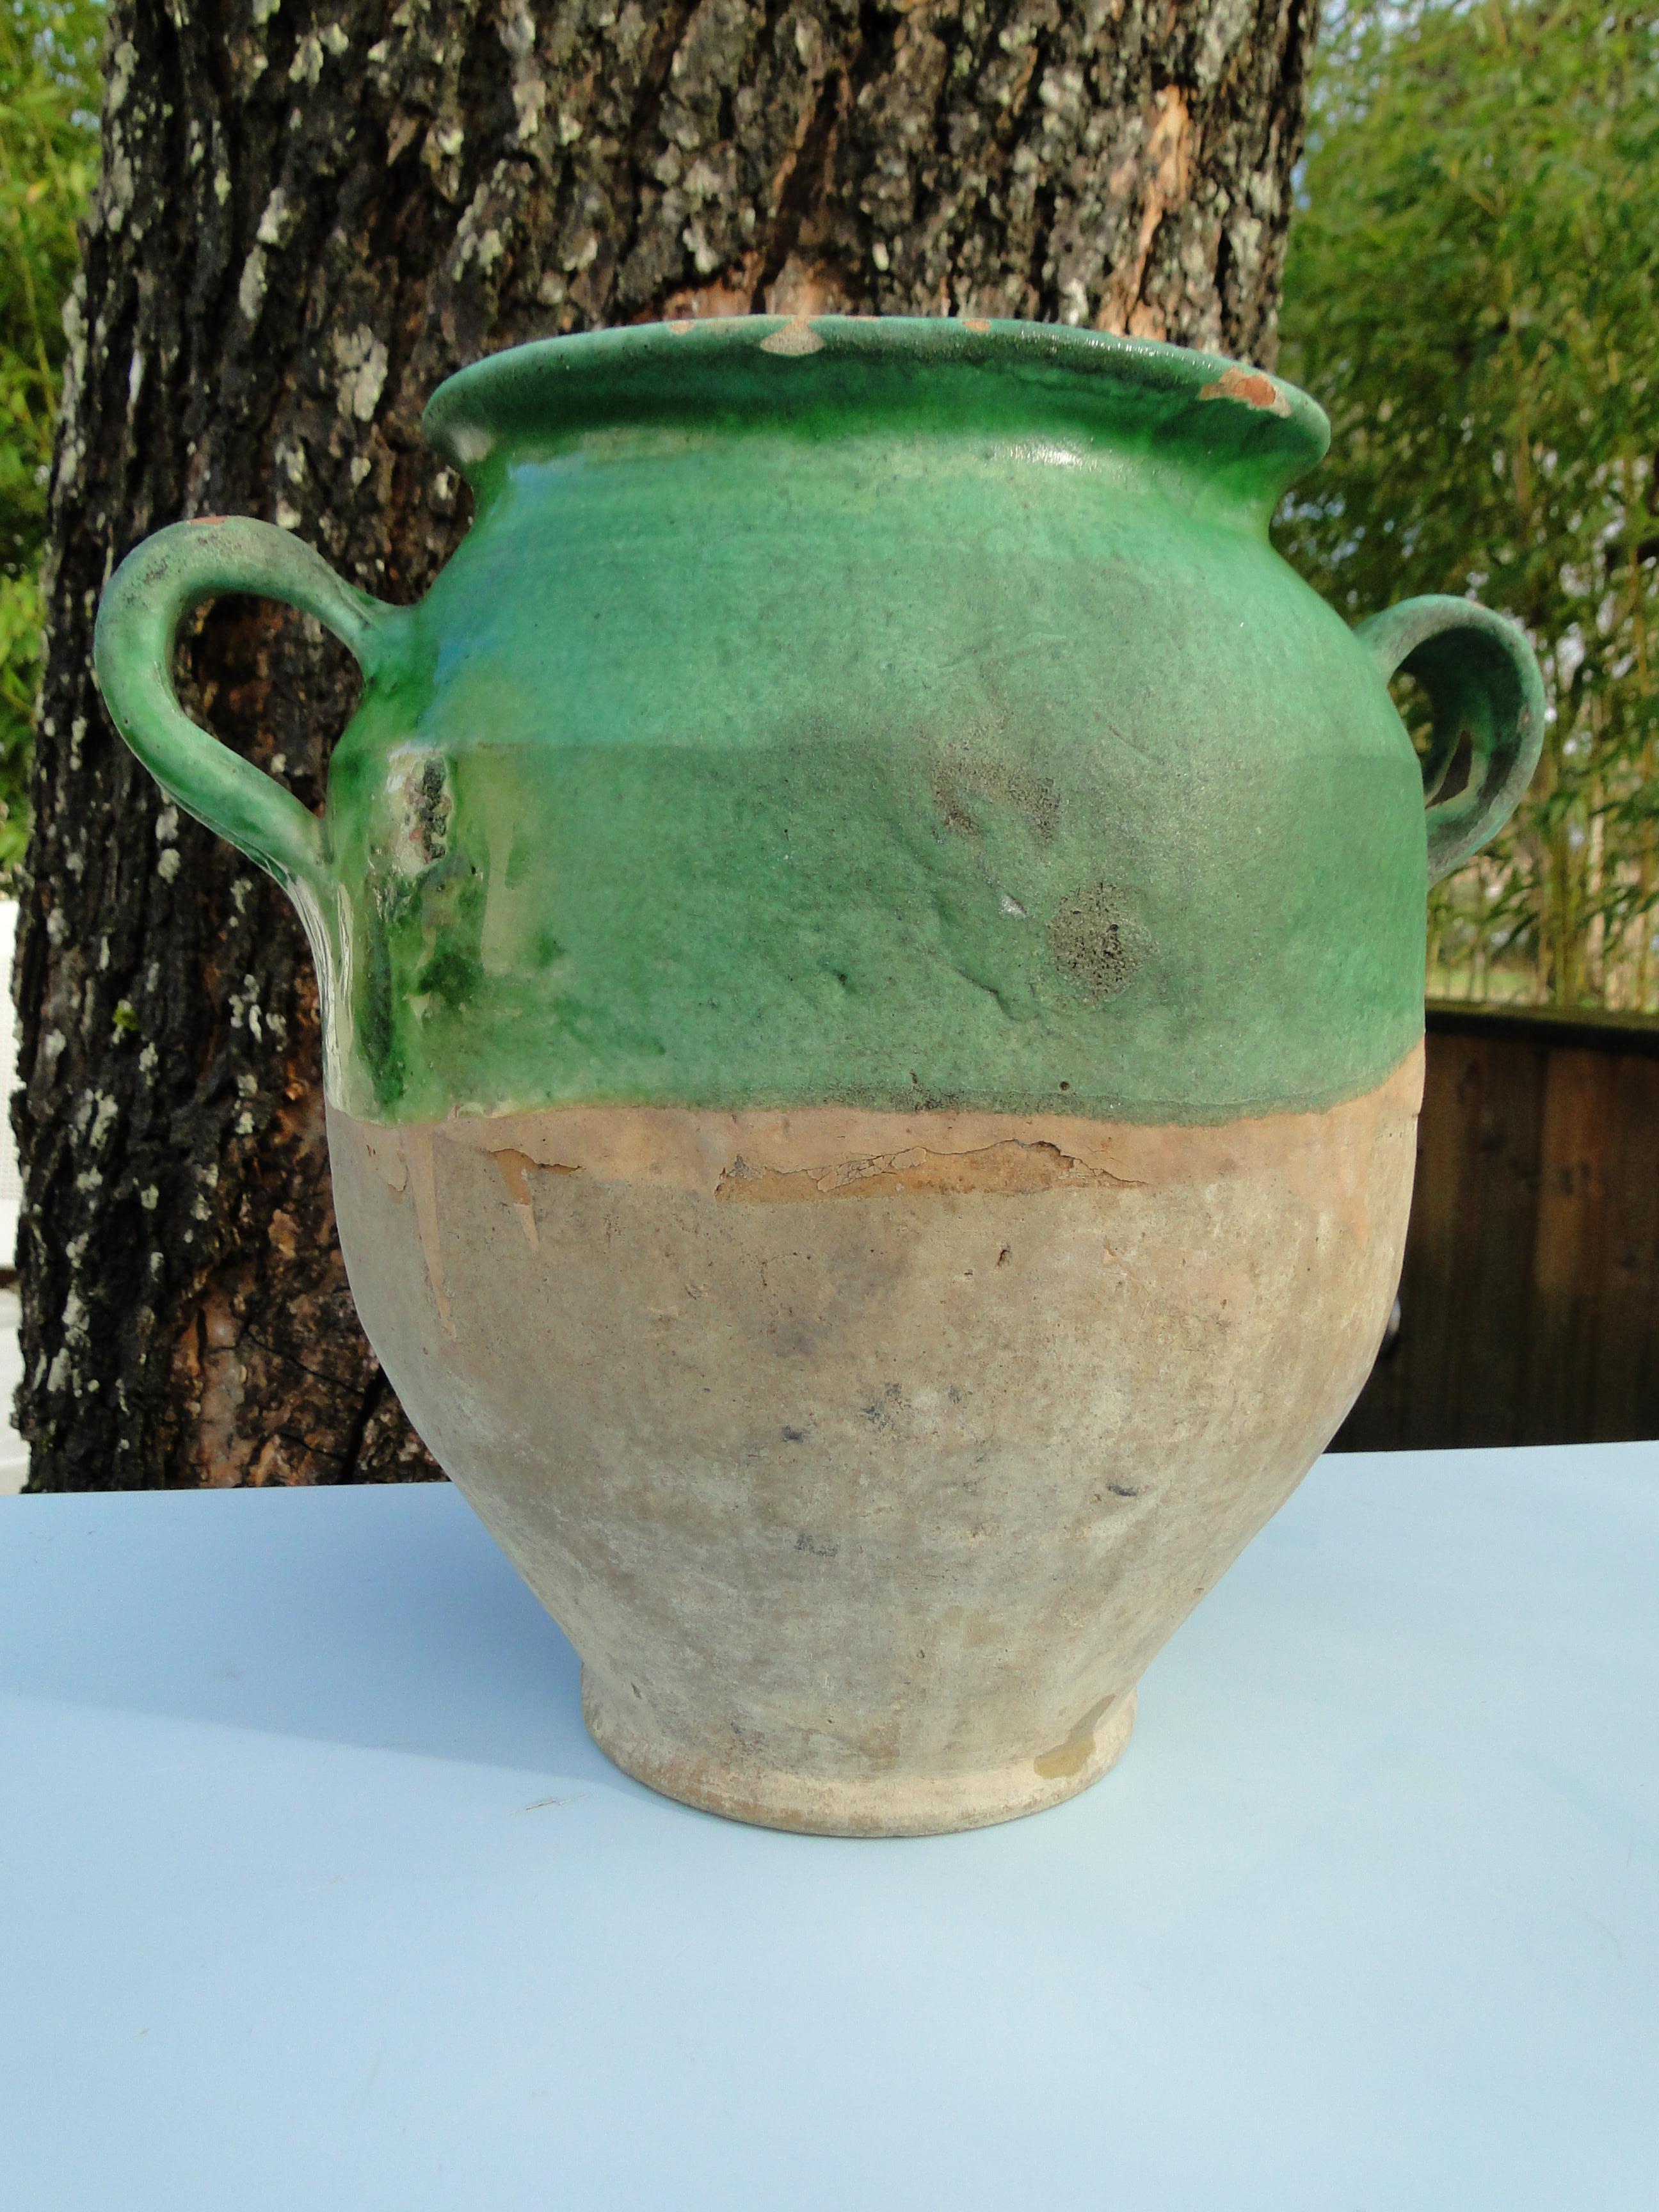 Glazed XL French Antique Confit Pot Green Redware Faience Yellowware Art Pottery France For Sale